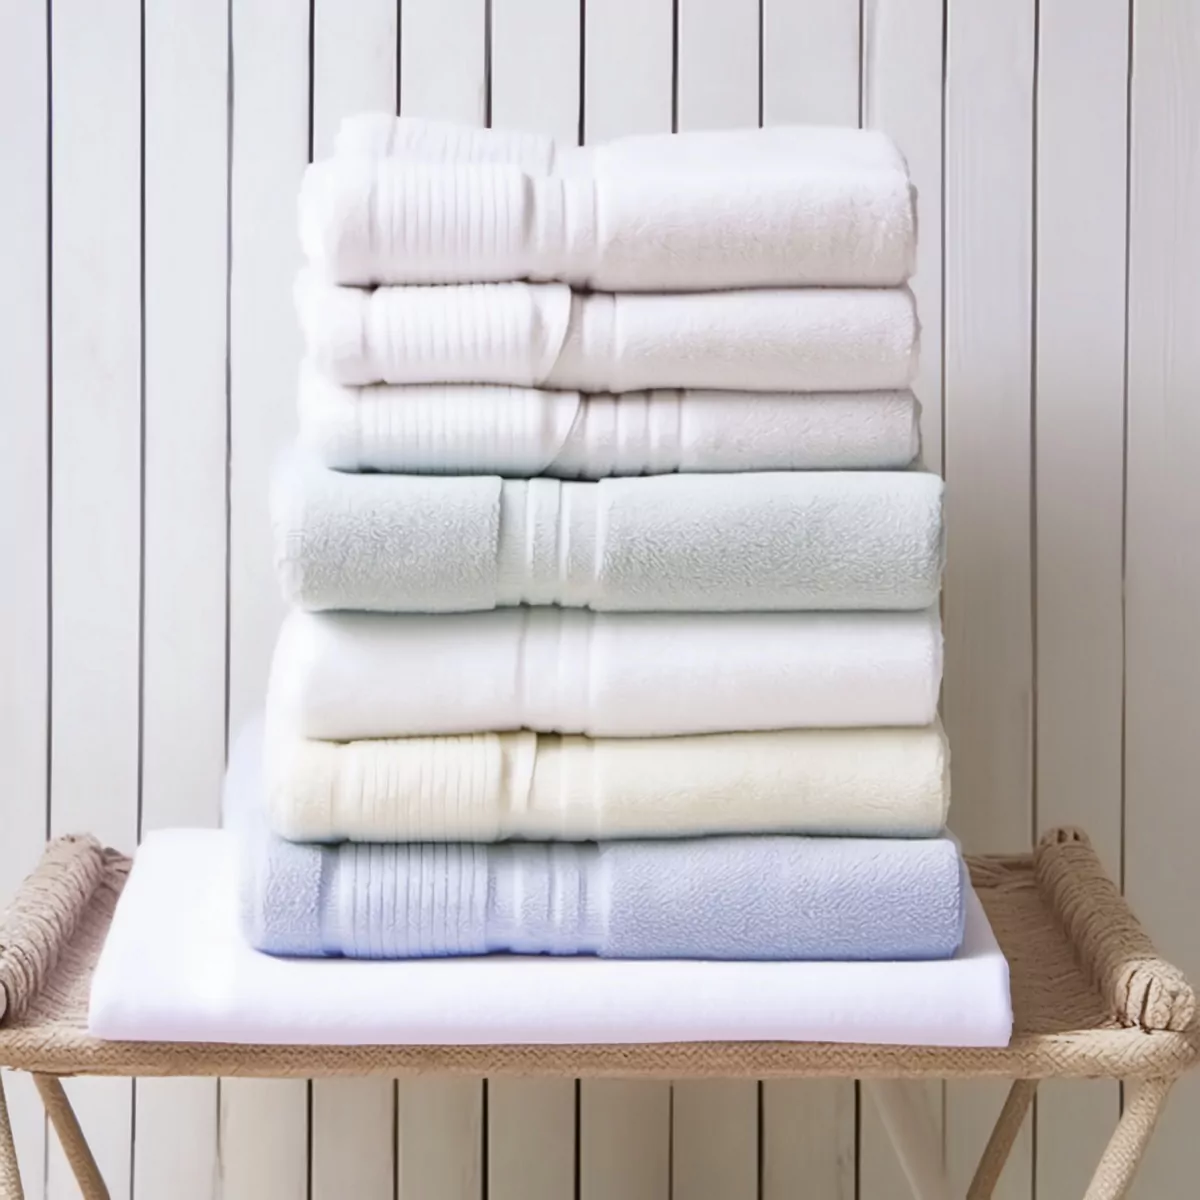 What are the benefits of having a Commercial Laundry Service